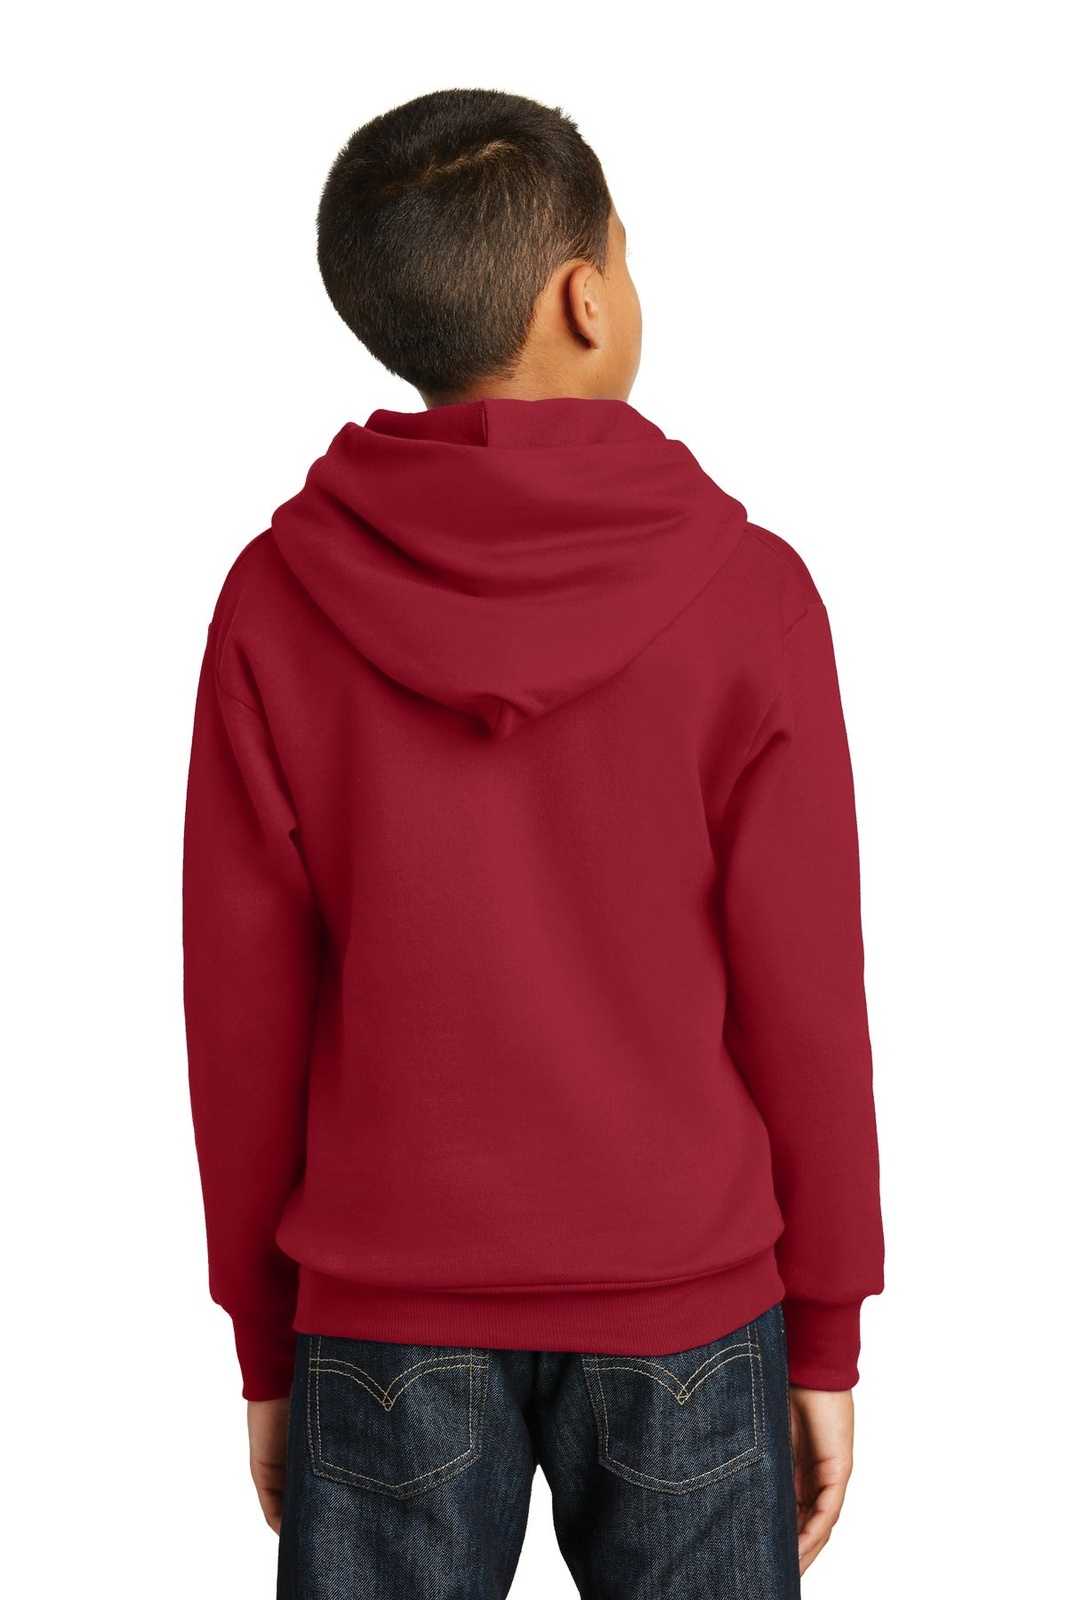 Hanes P470 Youth Ecosmart Pullover Hooded Sweatshirt - Deep Red - HIT a Double - 2